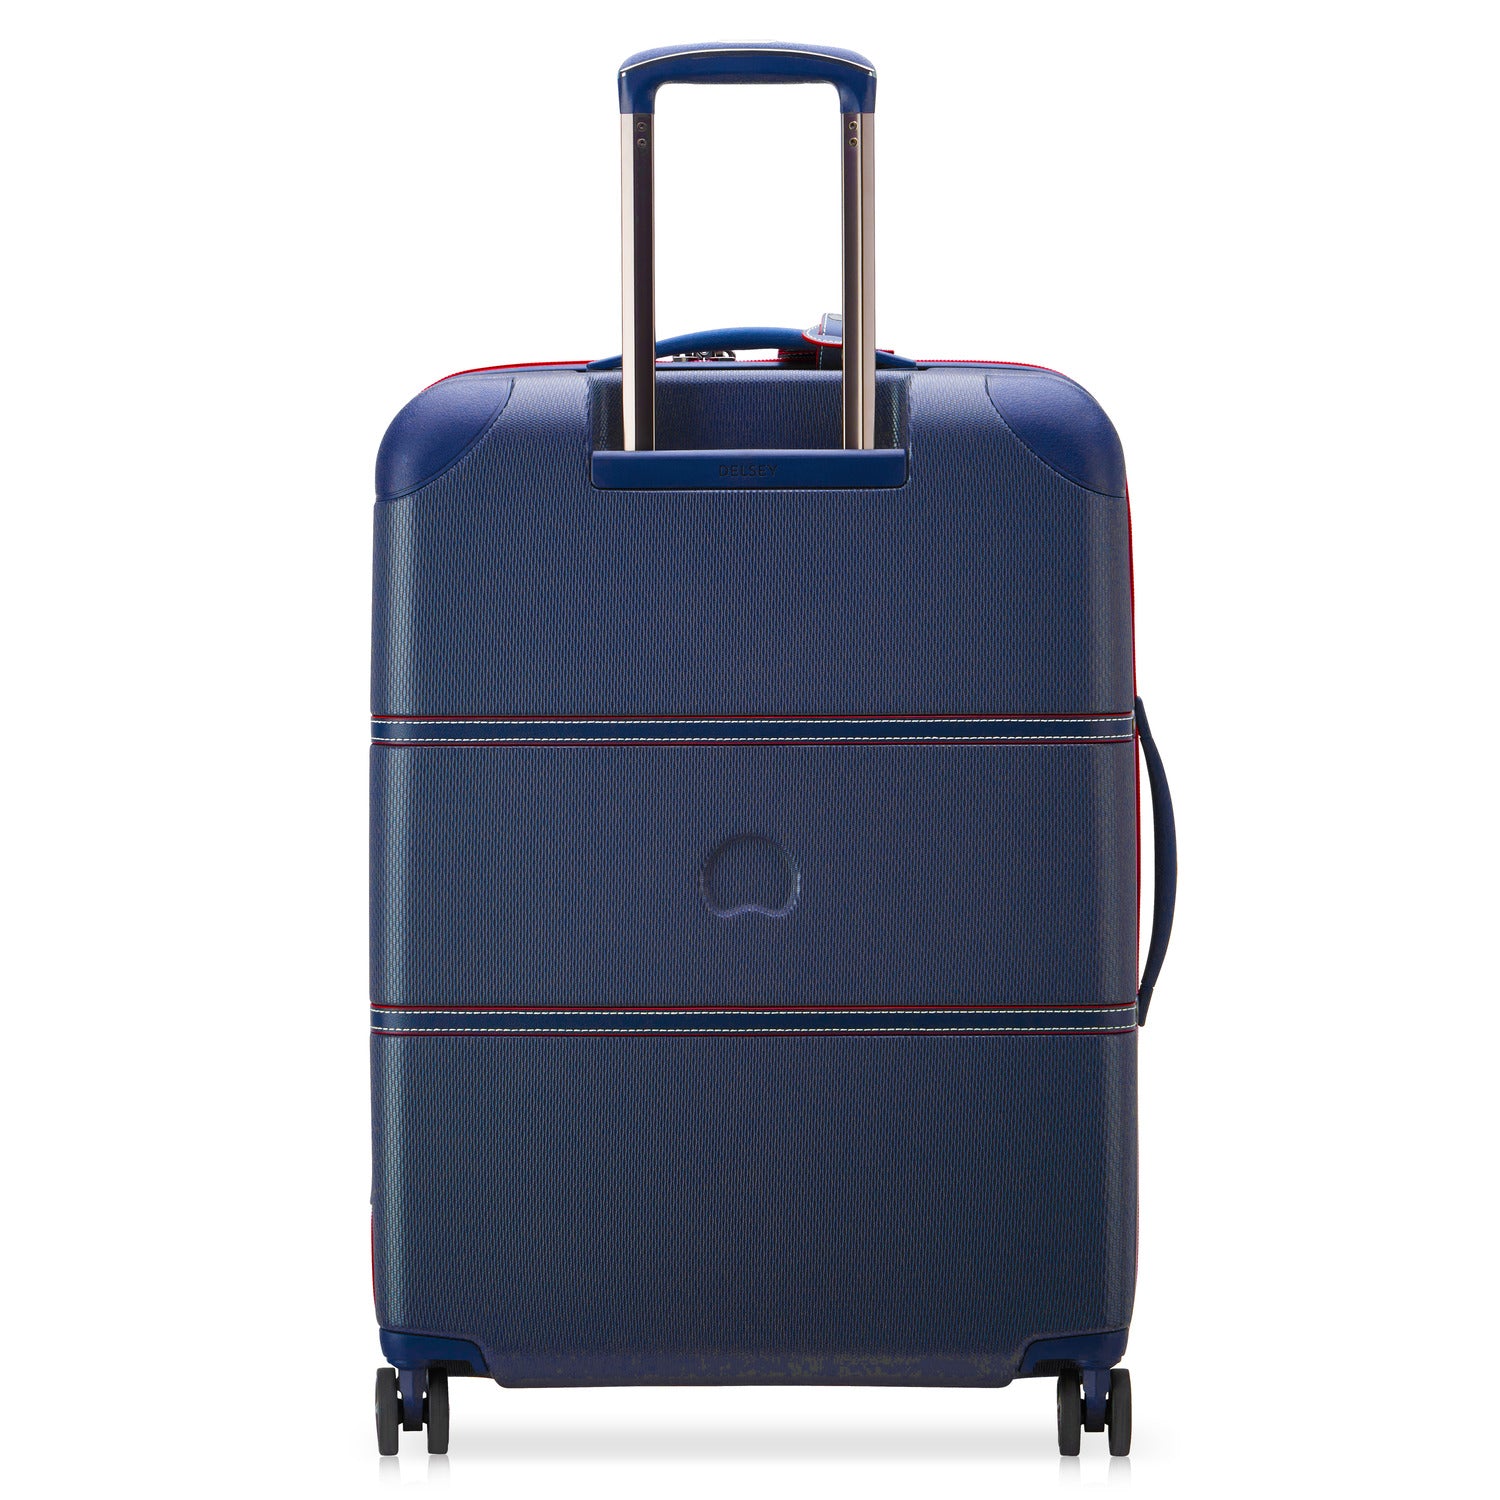 Delsey Chatelet Air 2.0 70cm Hardcase 4 Double Wheel Check-In Luggage Trolley Blue - 00167681902